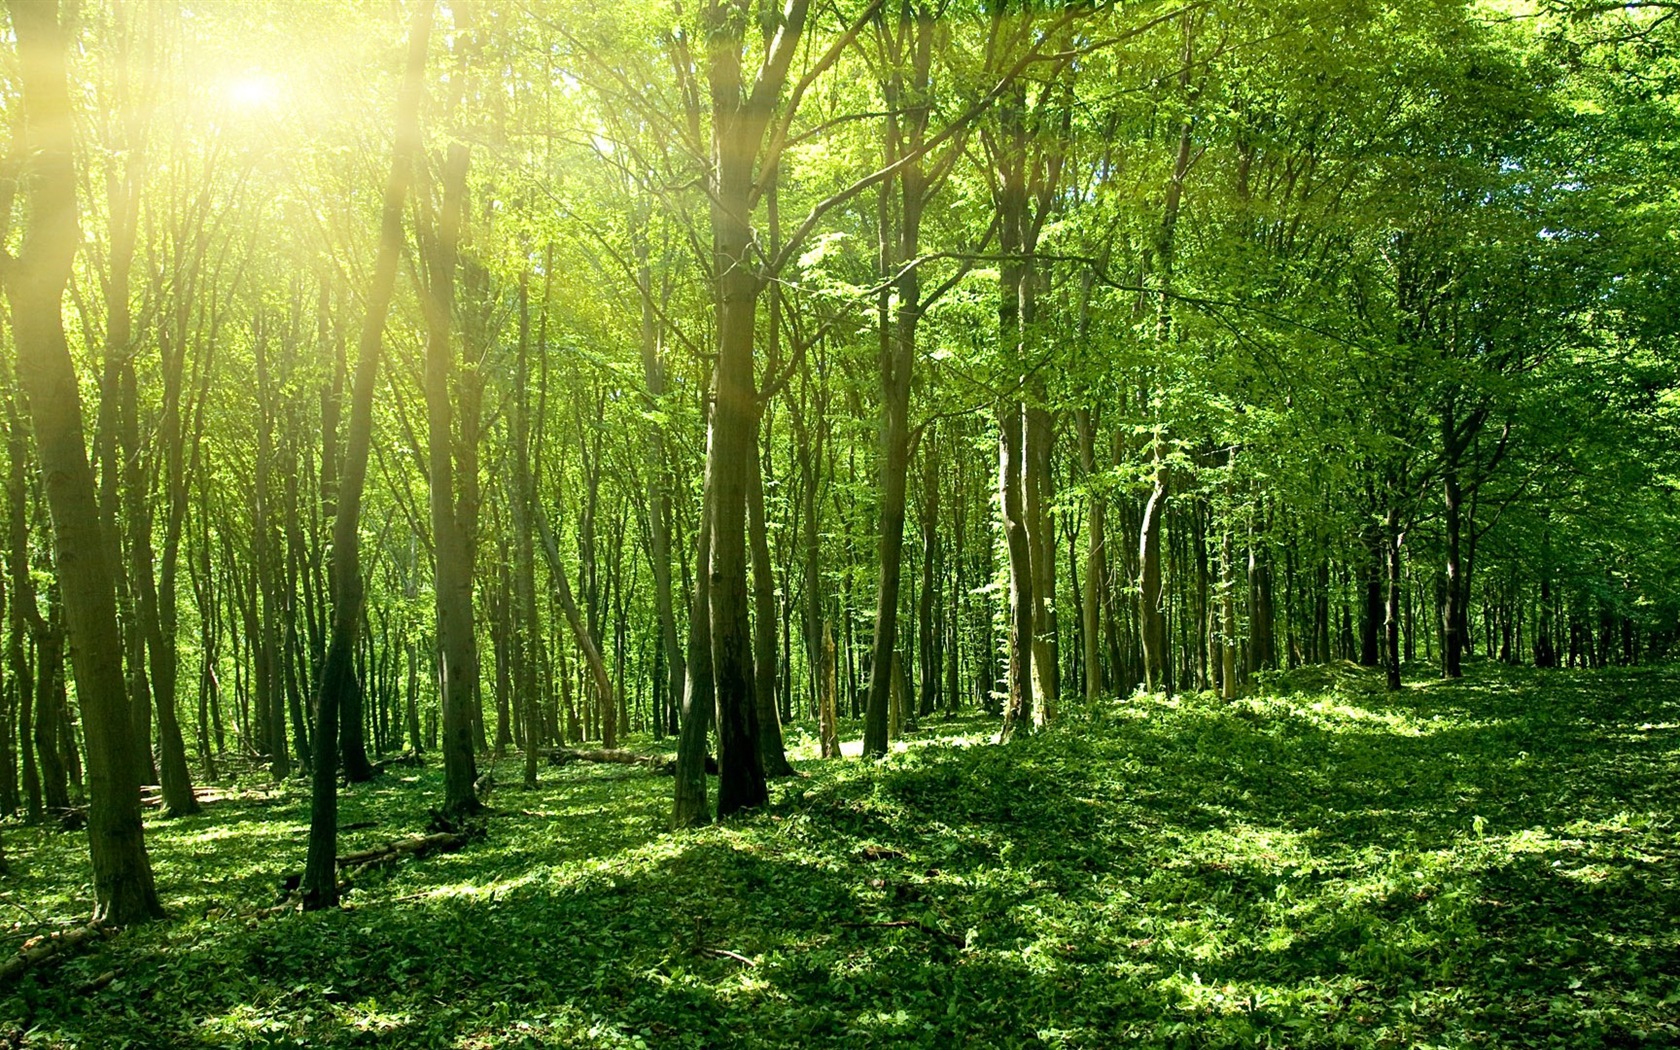 Windows 8 theme forest scenery HD wallpapers #3 - 1680x1050